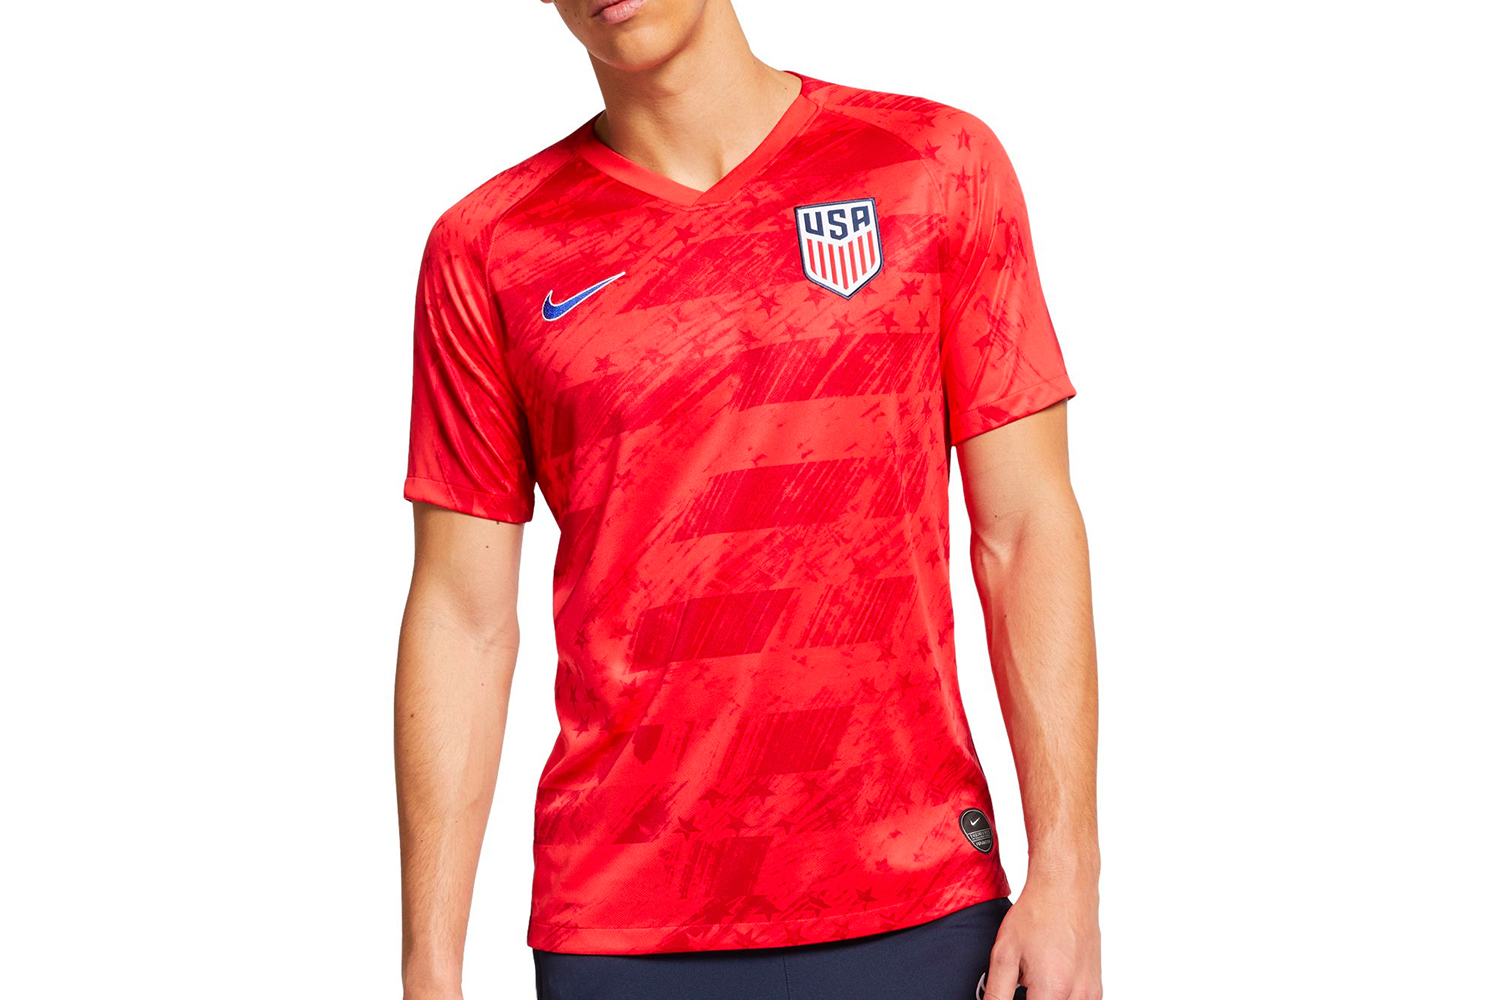 Badgers soccer World Cup champions jersey